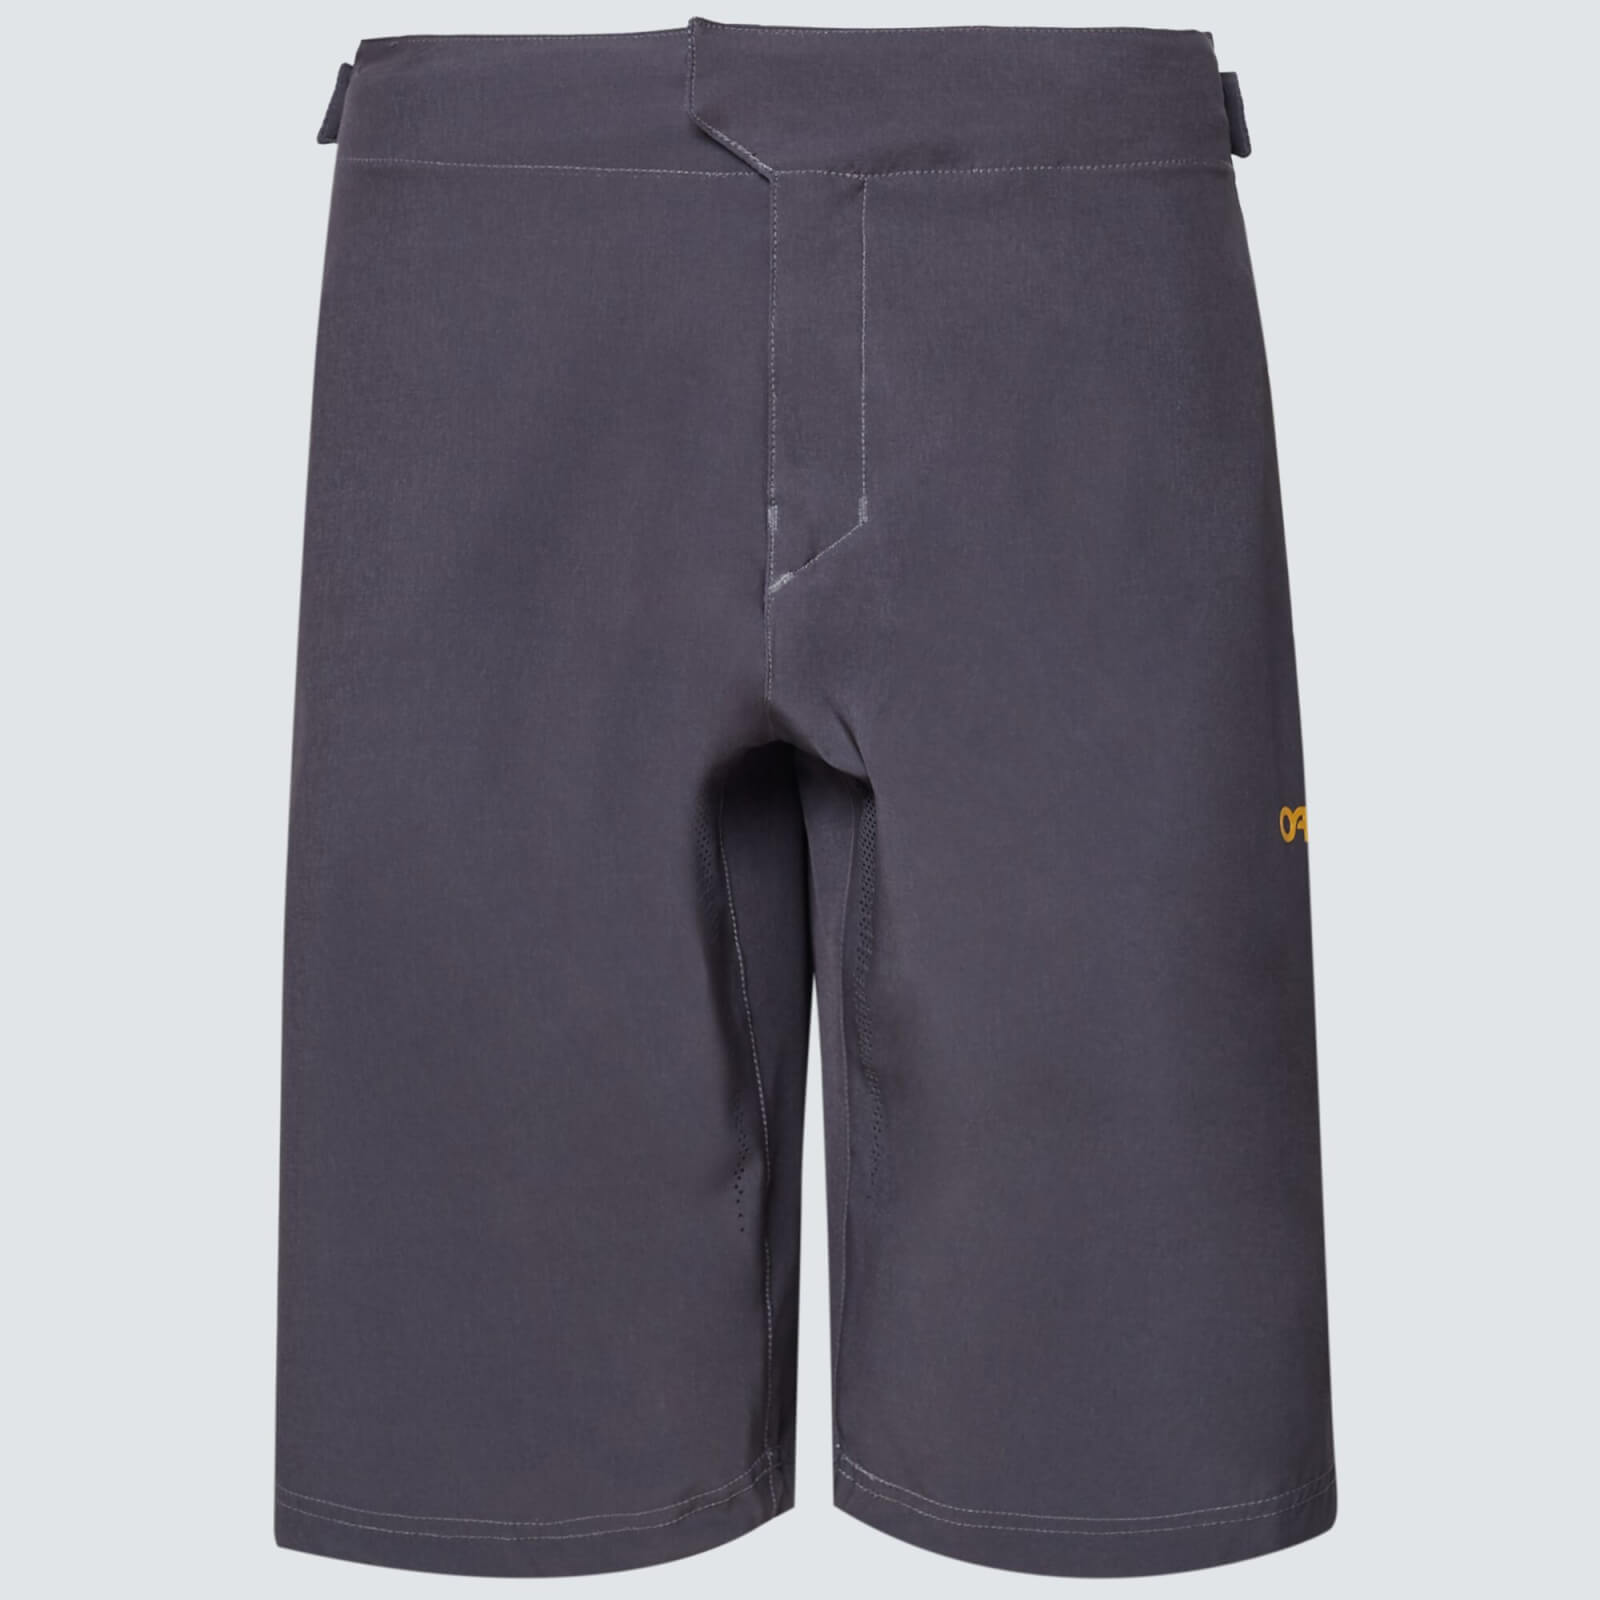 Oakley Reduct Berm Shorts - 31 - Forged Iron